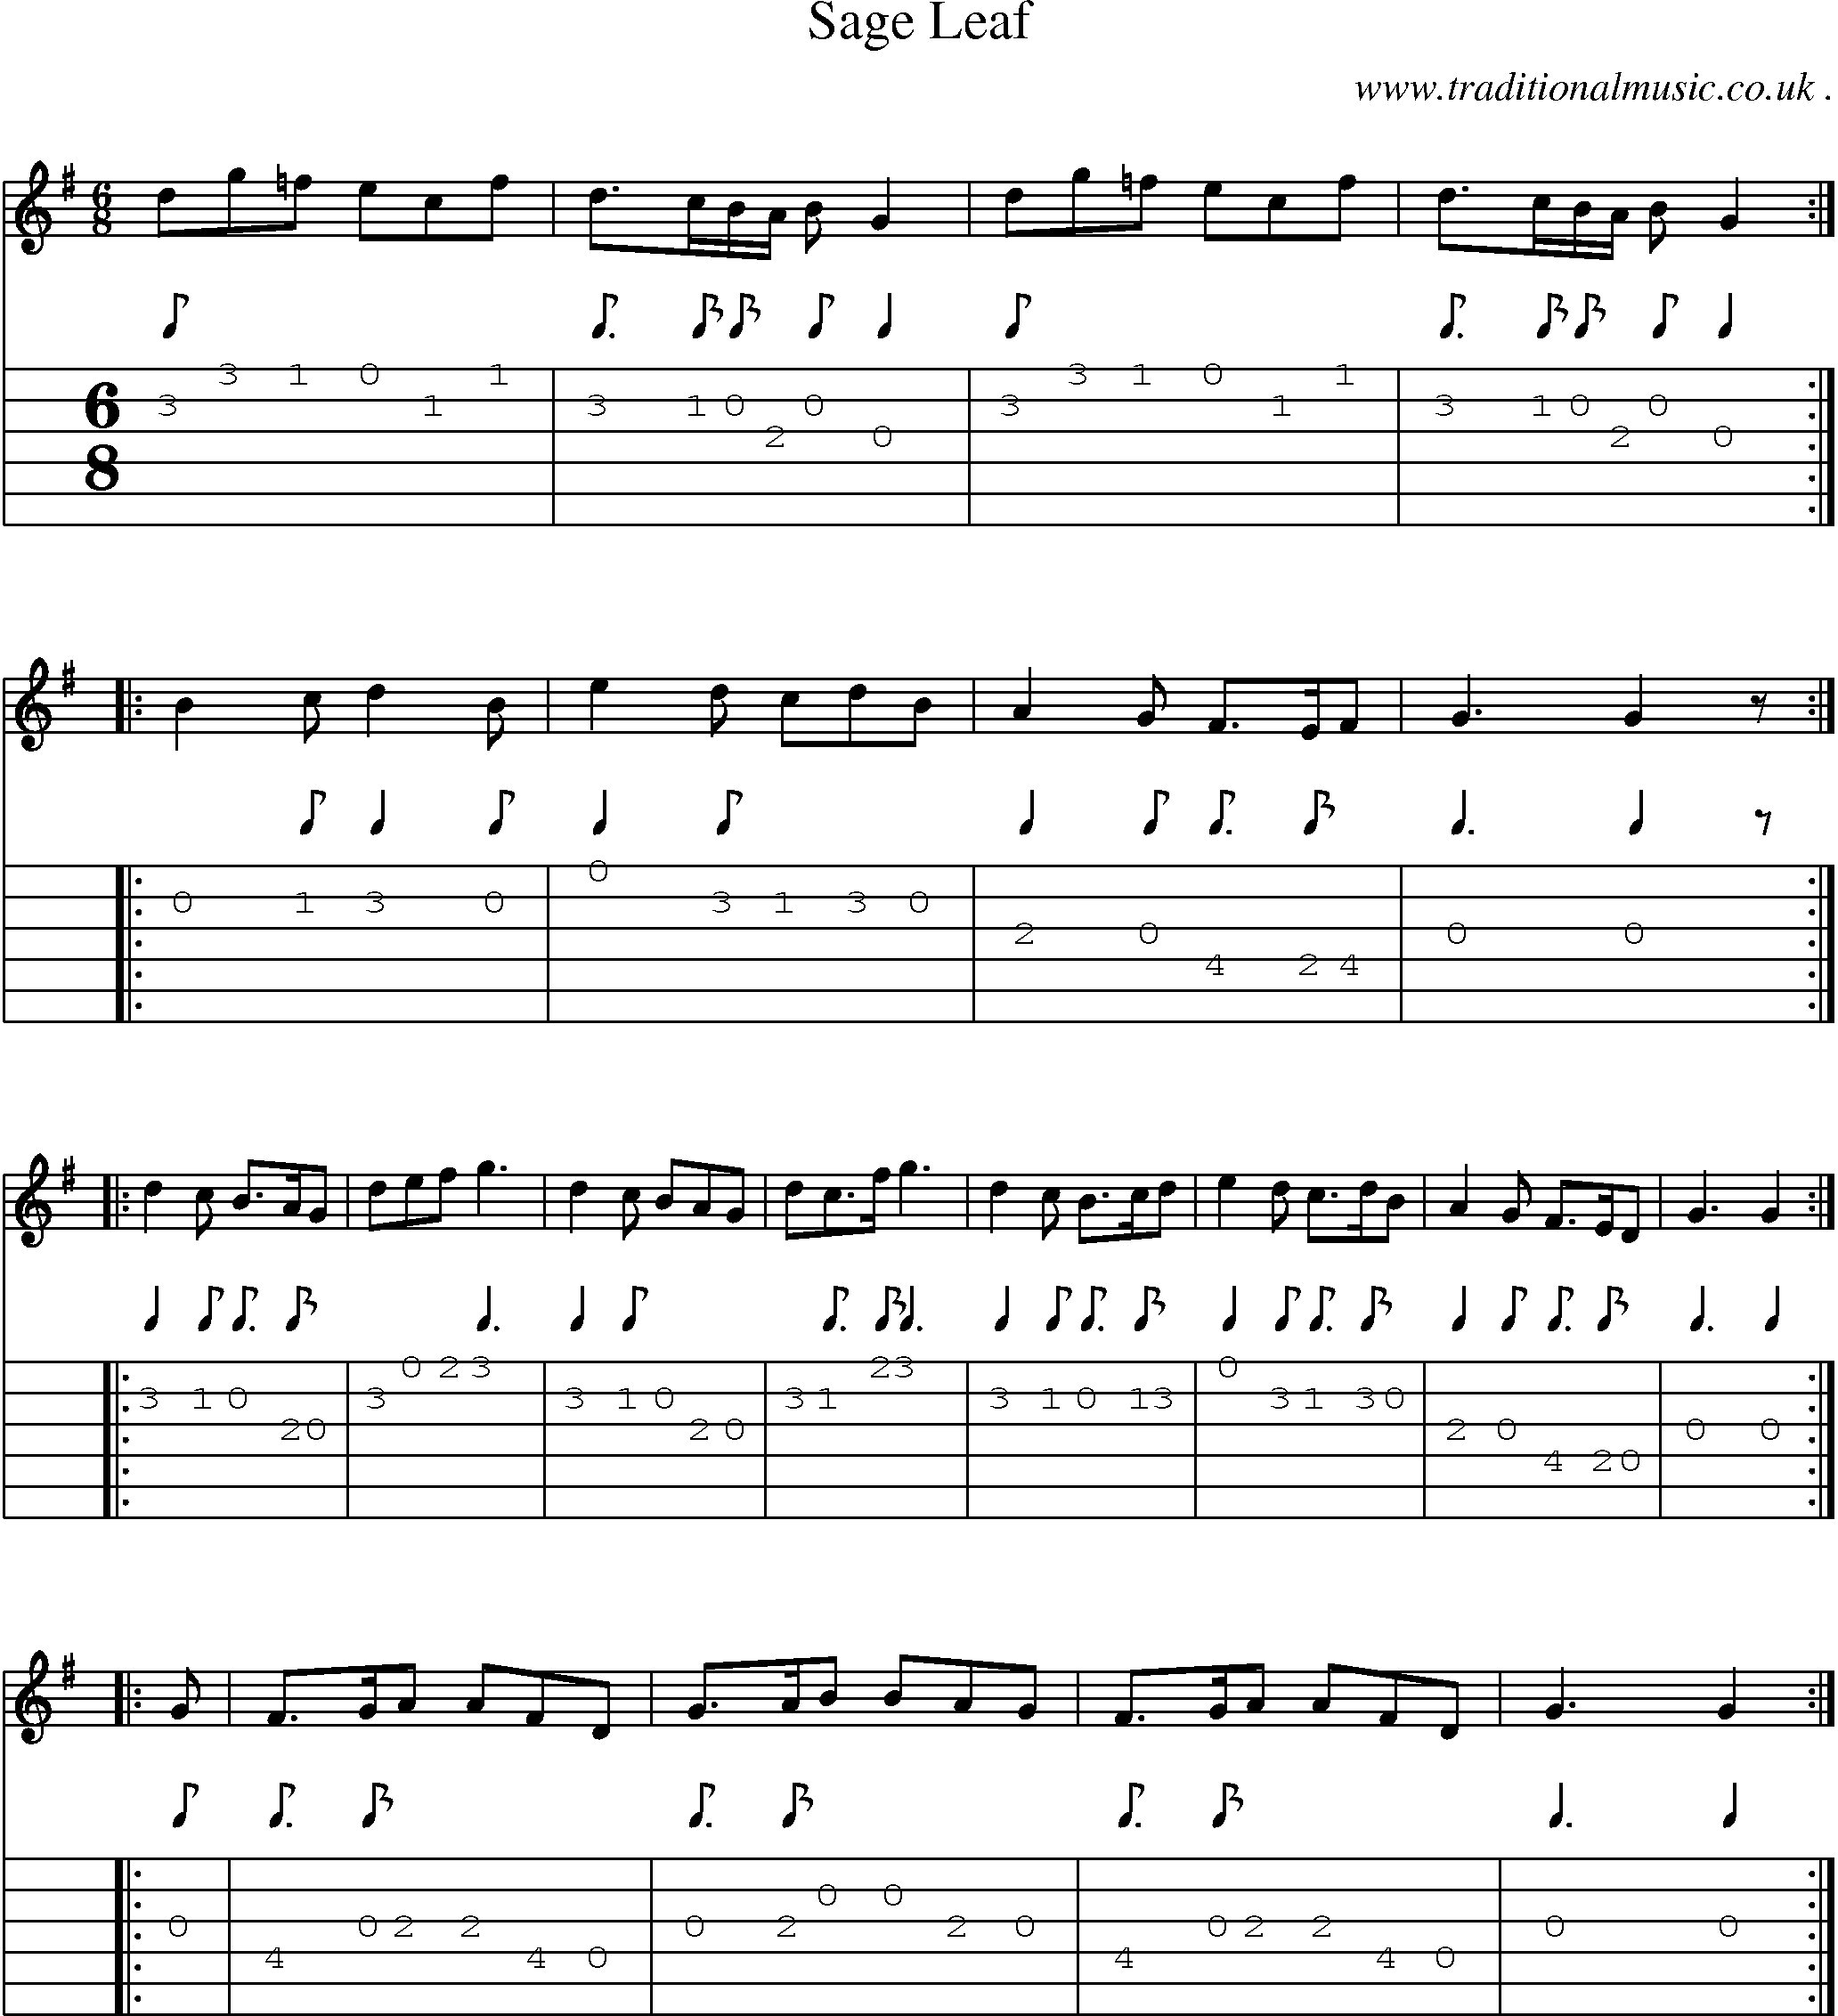 Sheet-Music and Guitar Tabs for Sage Leaf